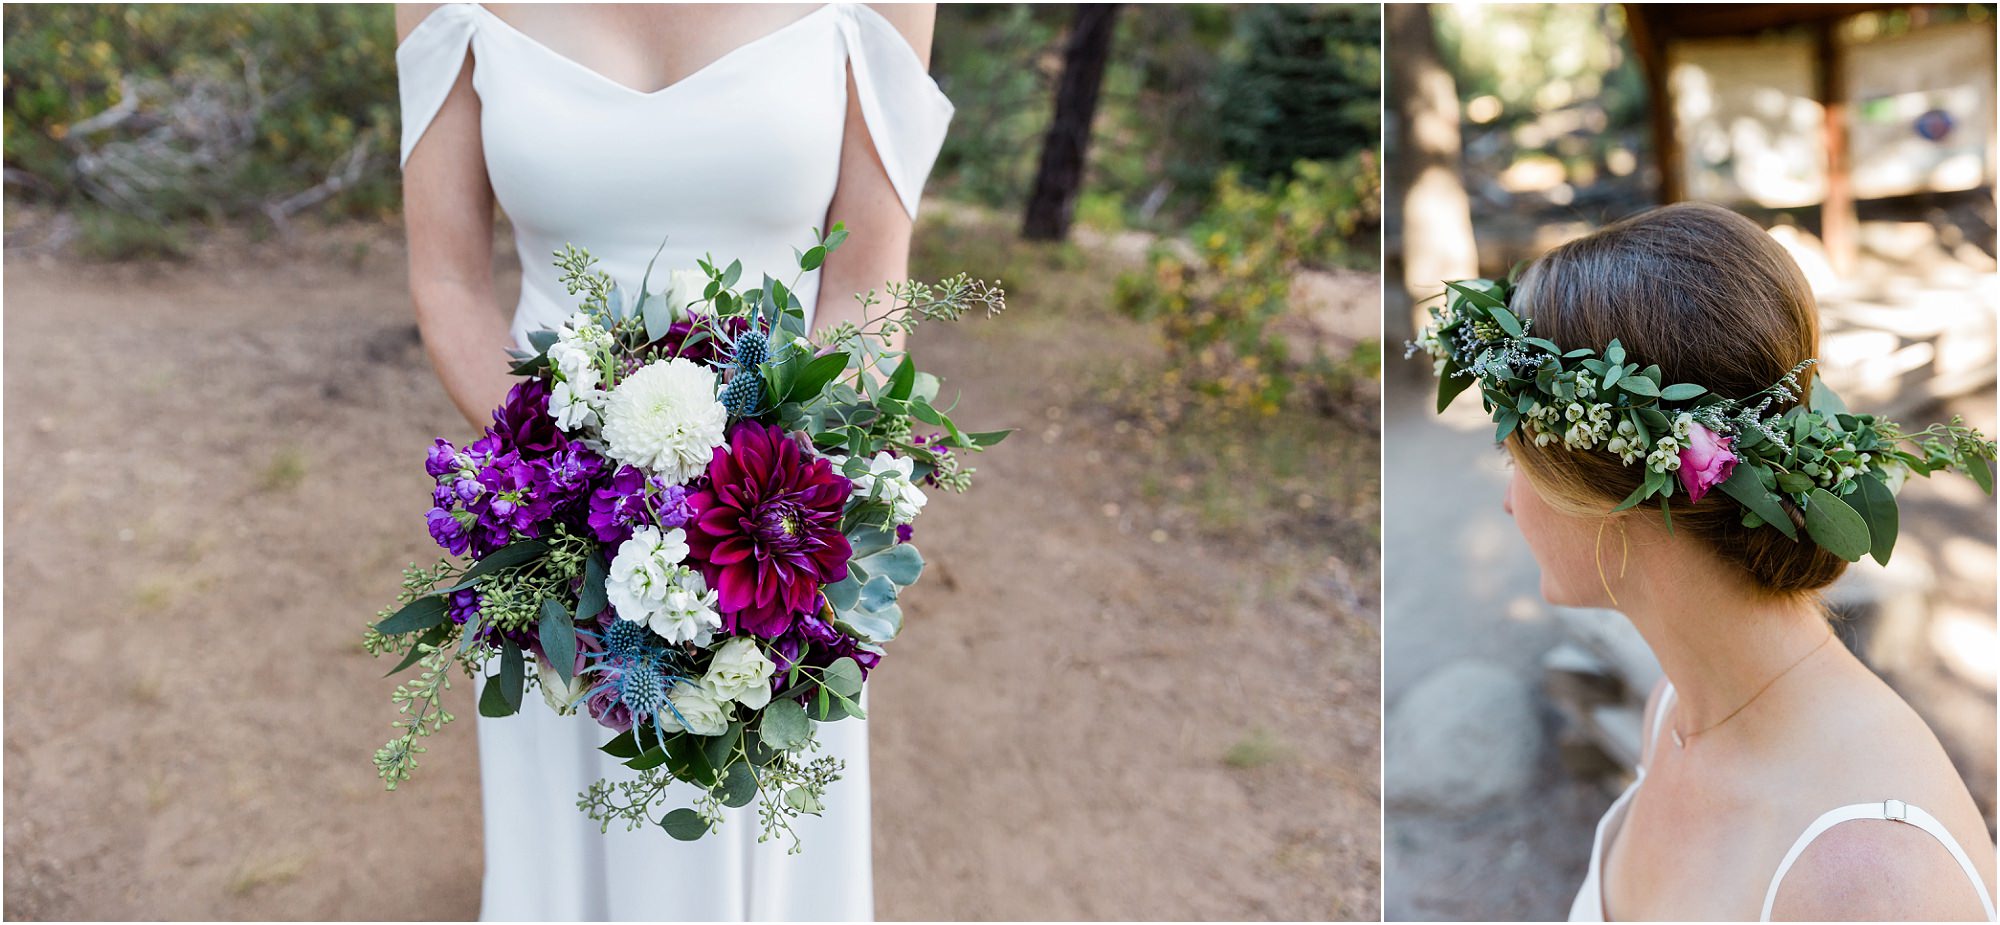 A gorgeous bouquet and floral headpiece with purple dahlias, pink and white roses and tons of greenery for this adventurous Tumalo Falls elopement bride in Bend, OR. | Erica Swantek Photography